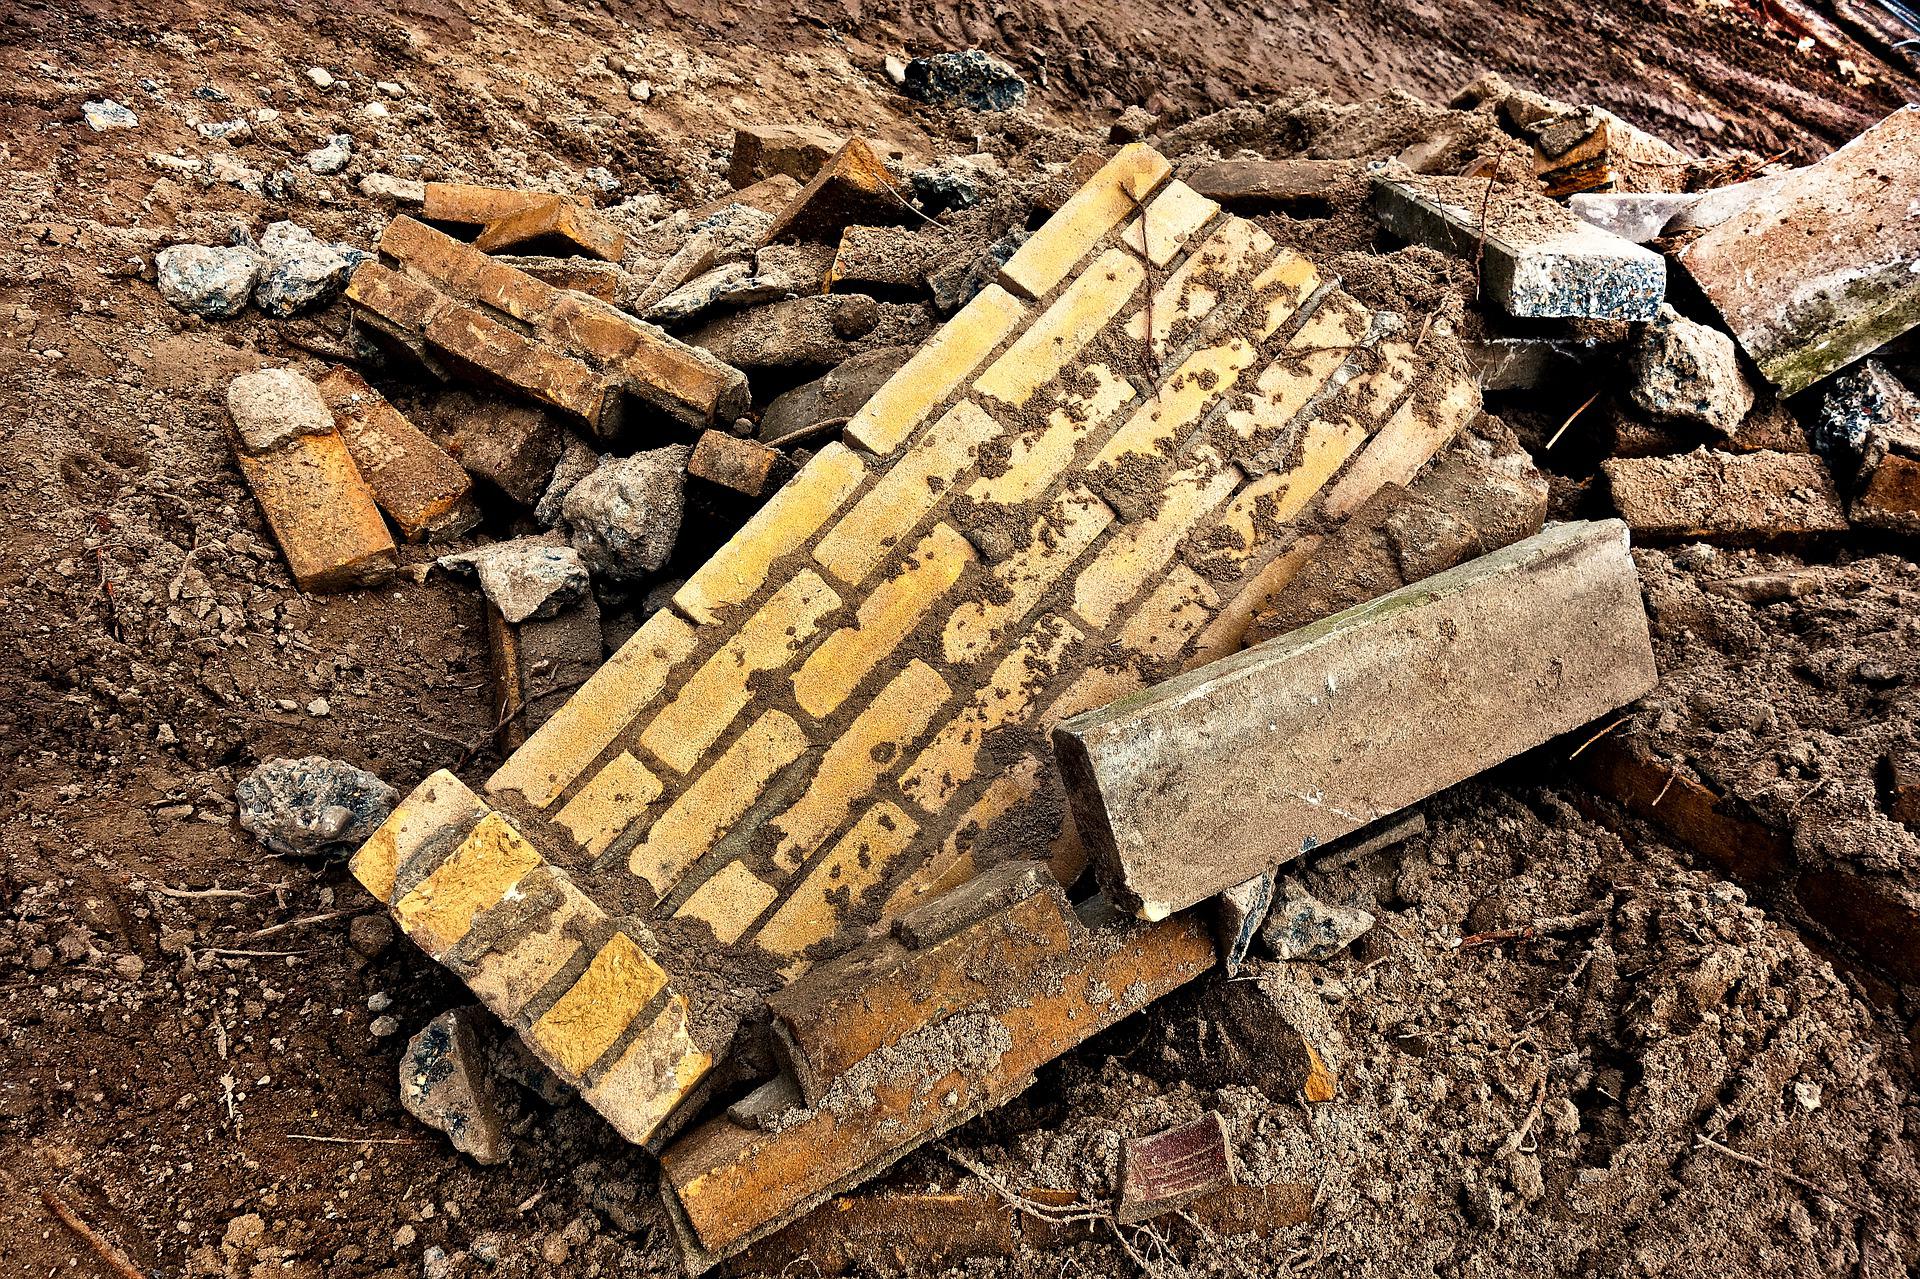 Brick Disposal and Recycling Services